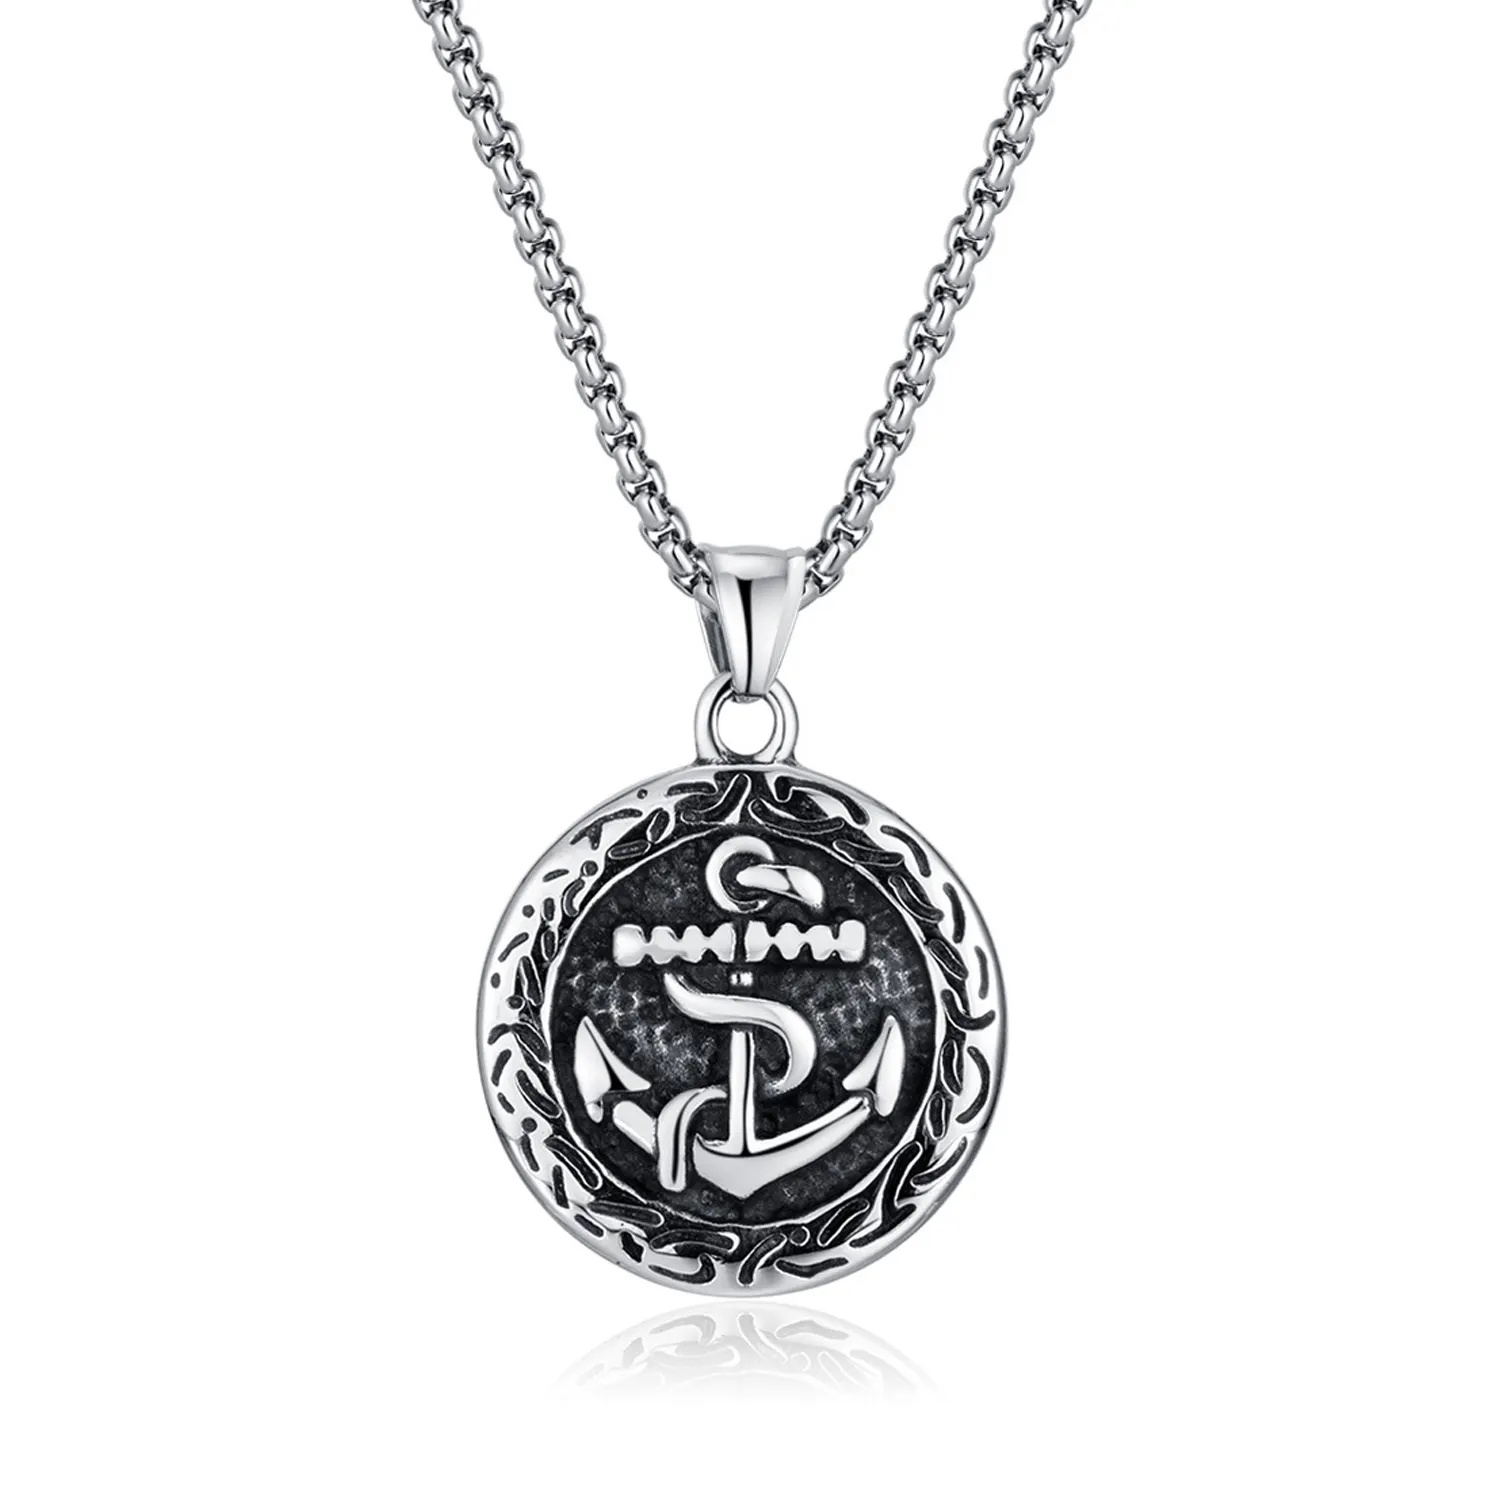 SSN140 Mens Stainless Steel Nautical Anchor Round Pendant Necklace Vintage Navy Symbol Necklace for Boys